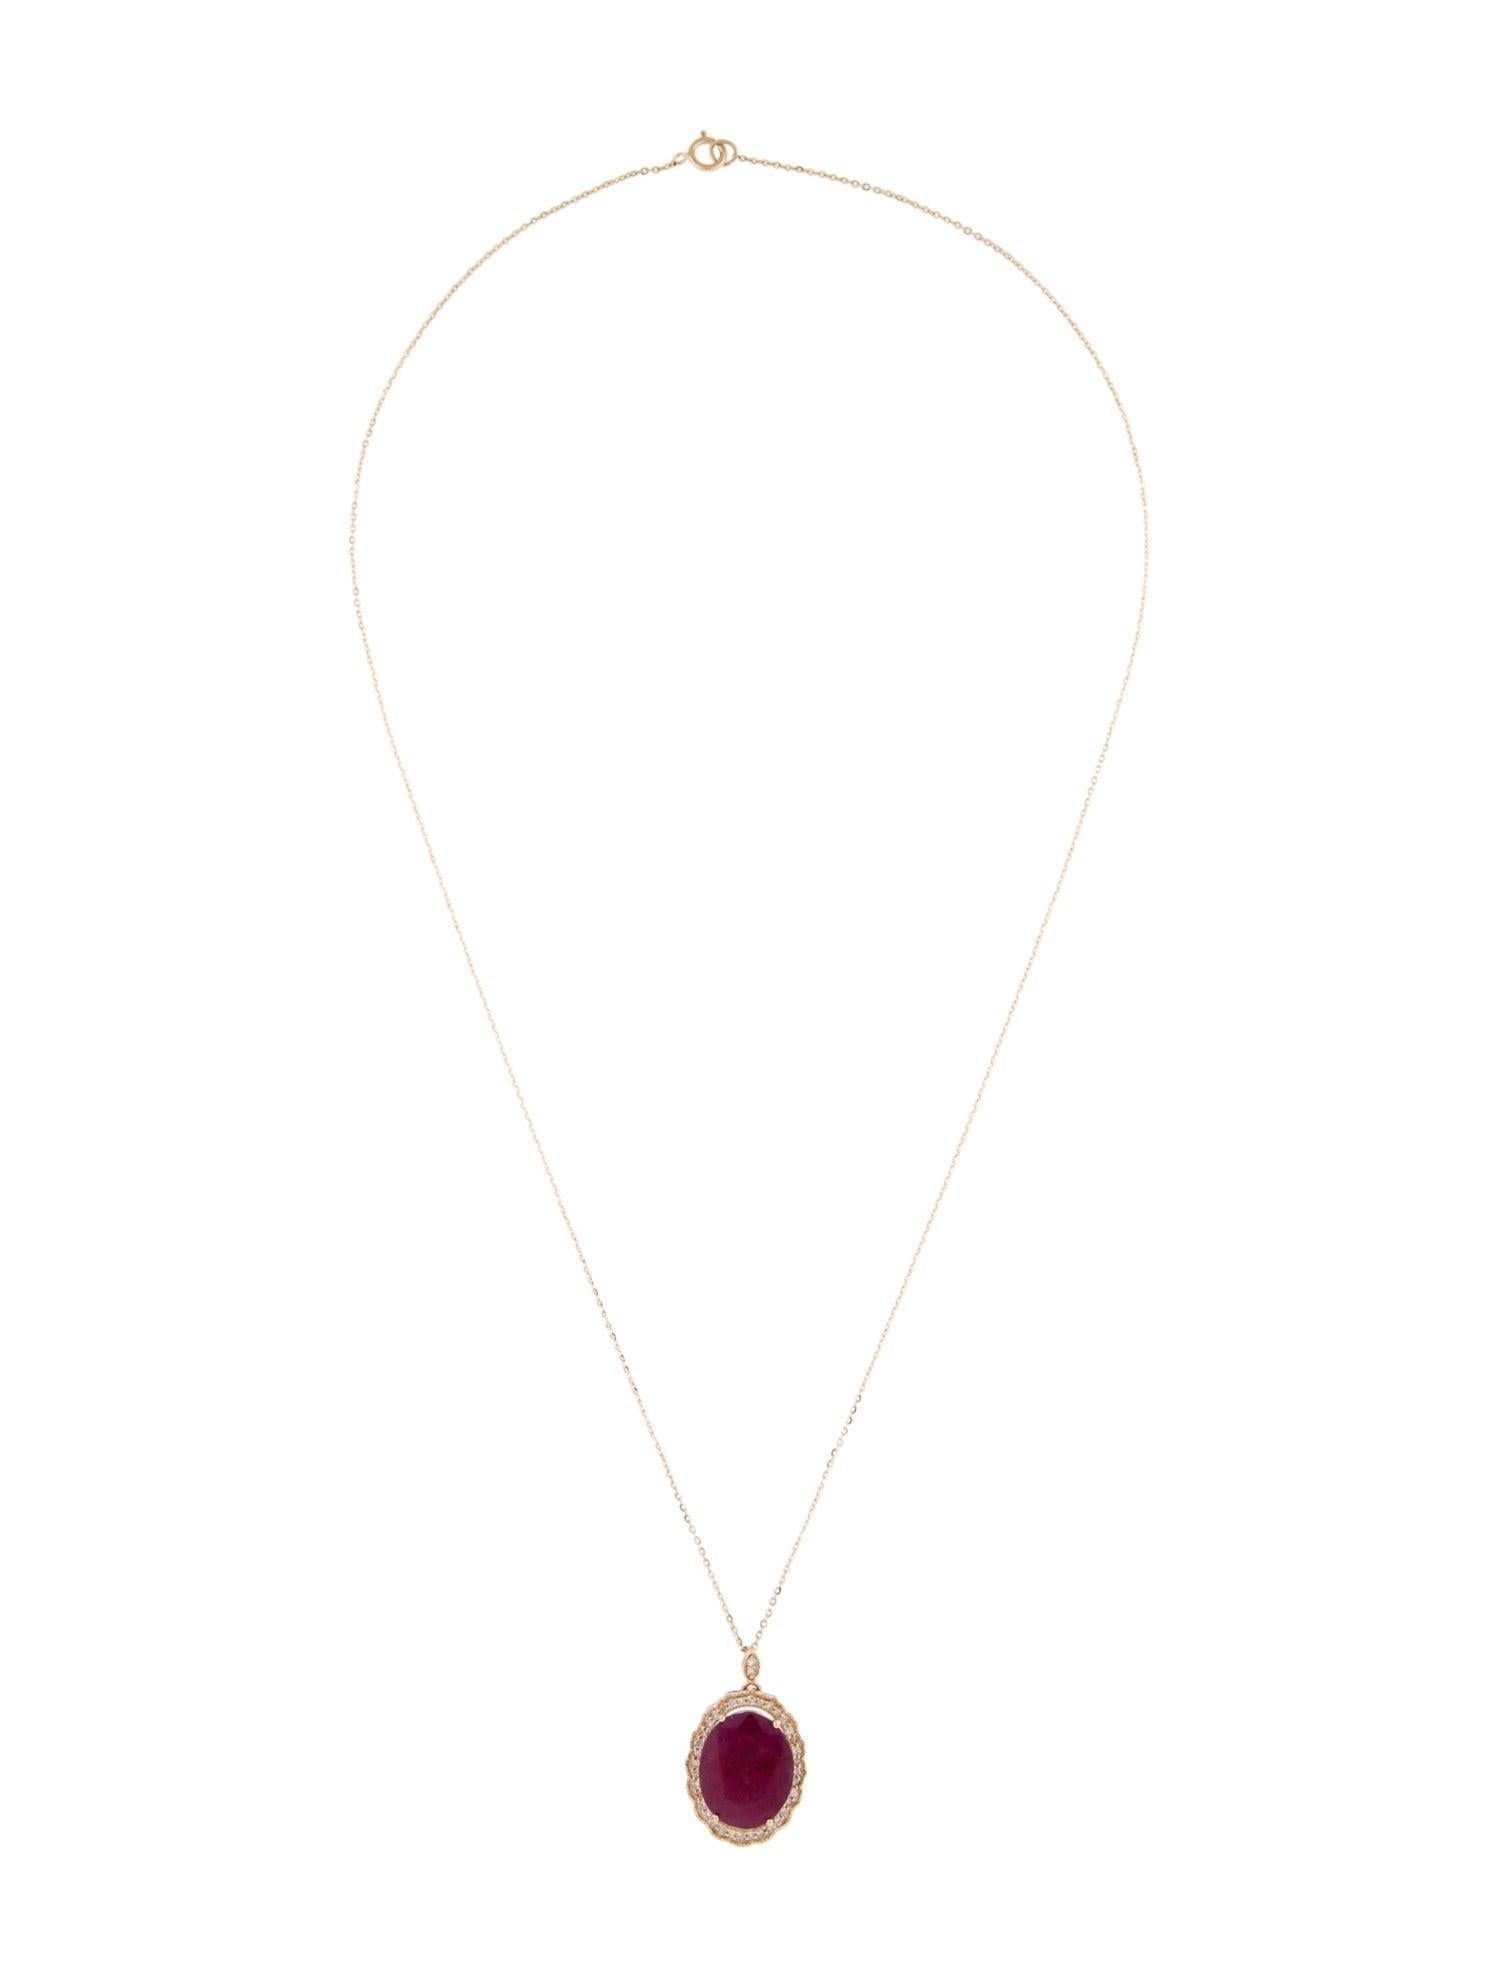 Women's 14K 3.79ct Ruby & Diamond Pendant Necklace: Exquisite Luxury Statement Jewelry For Sale